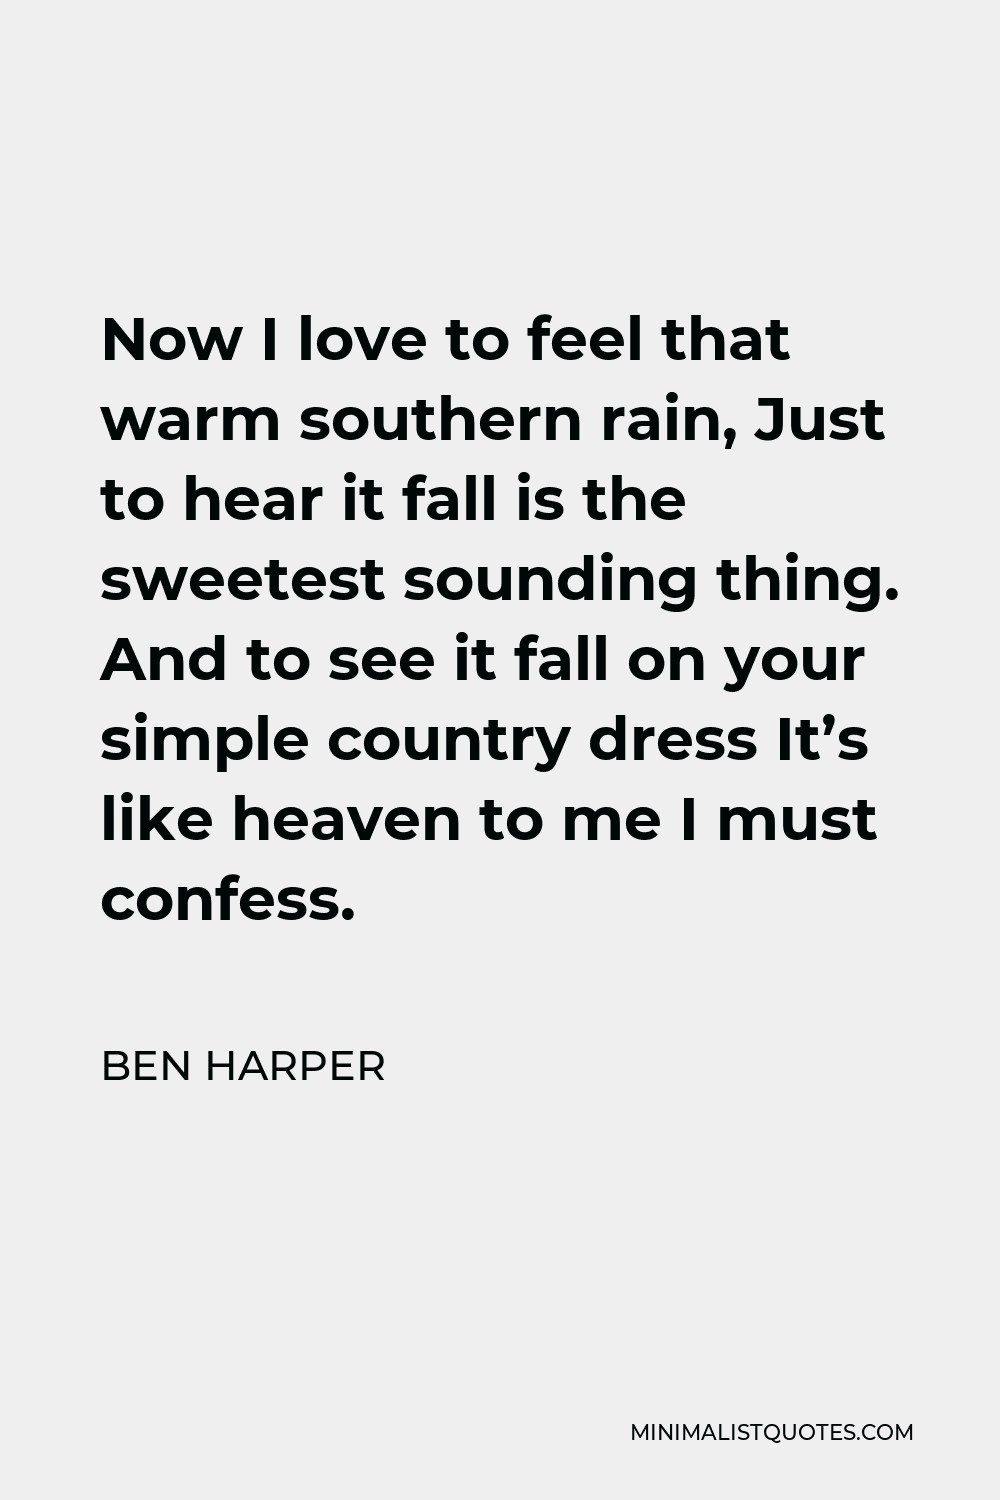 Ben Harper Quote - Now I love to feel that warm southern rain, Just to hear it fall is the sweetest sounding thing. And to see it fall on your simple country dress It’s like heaven to me I must confess.